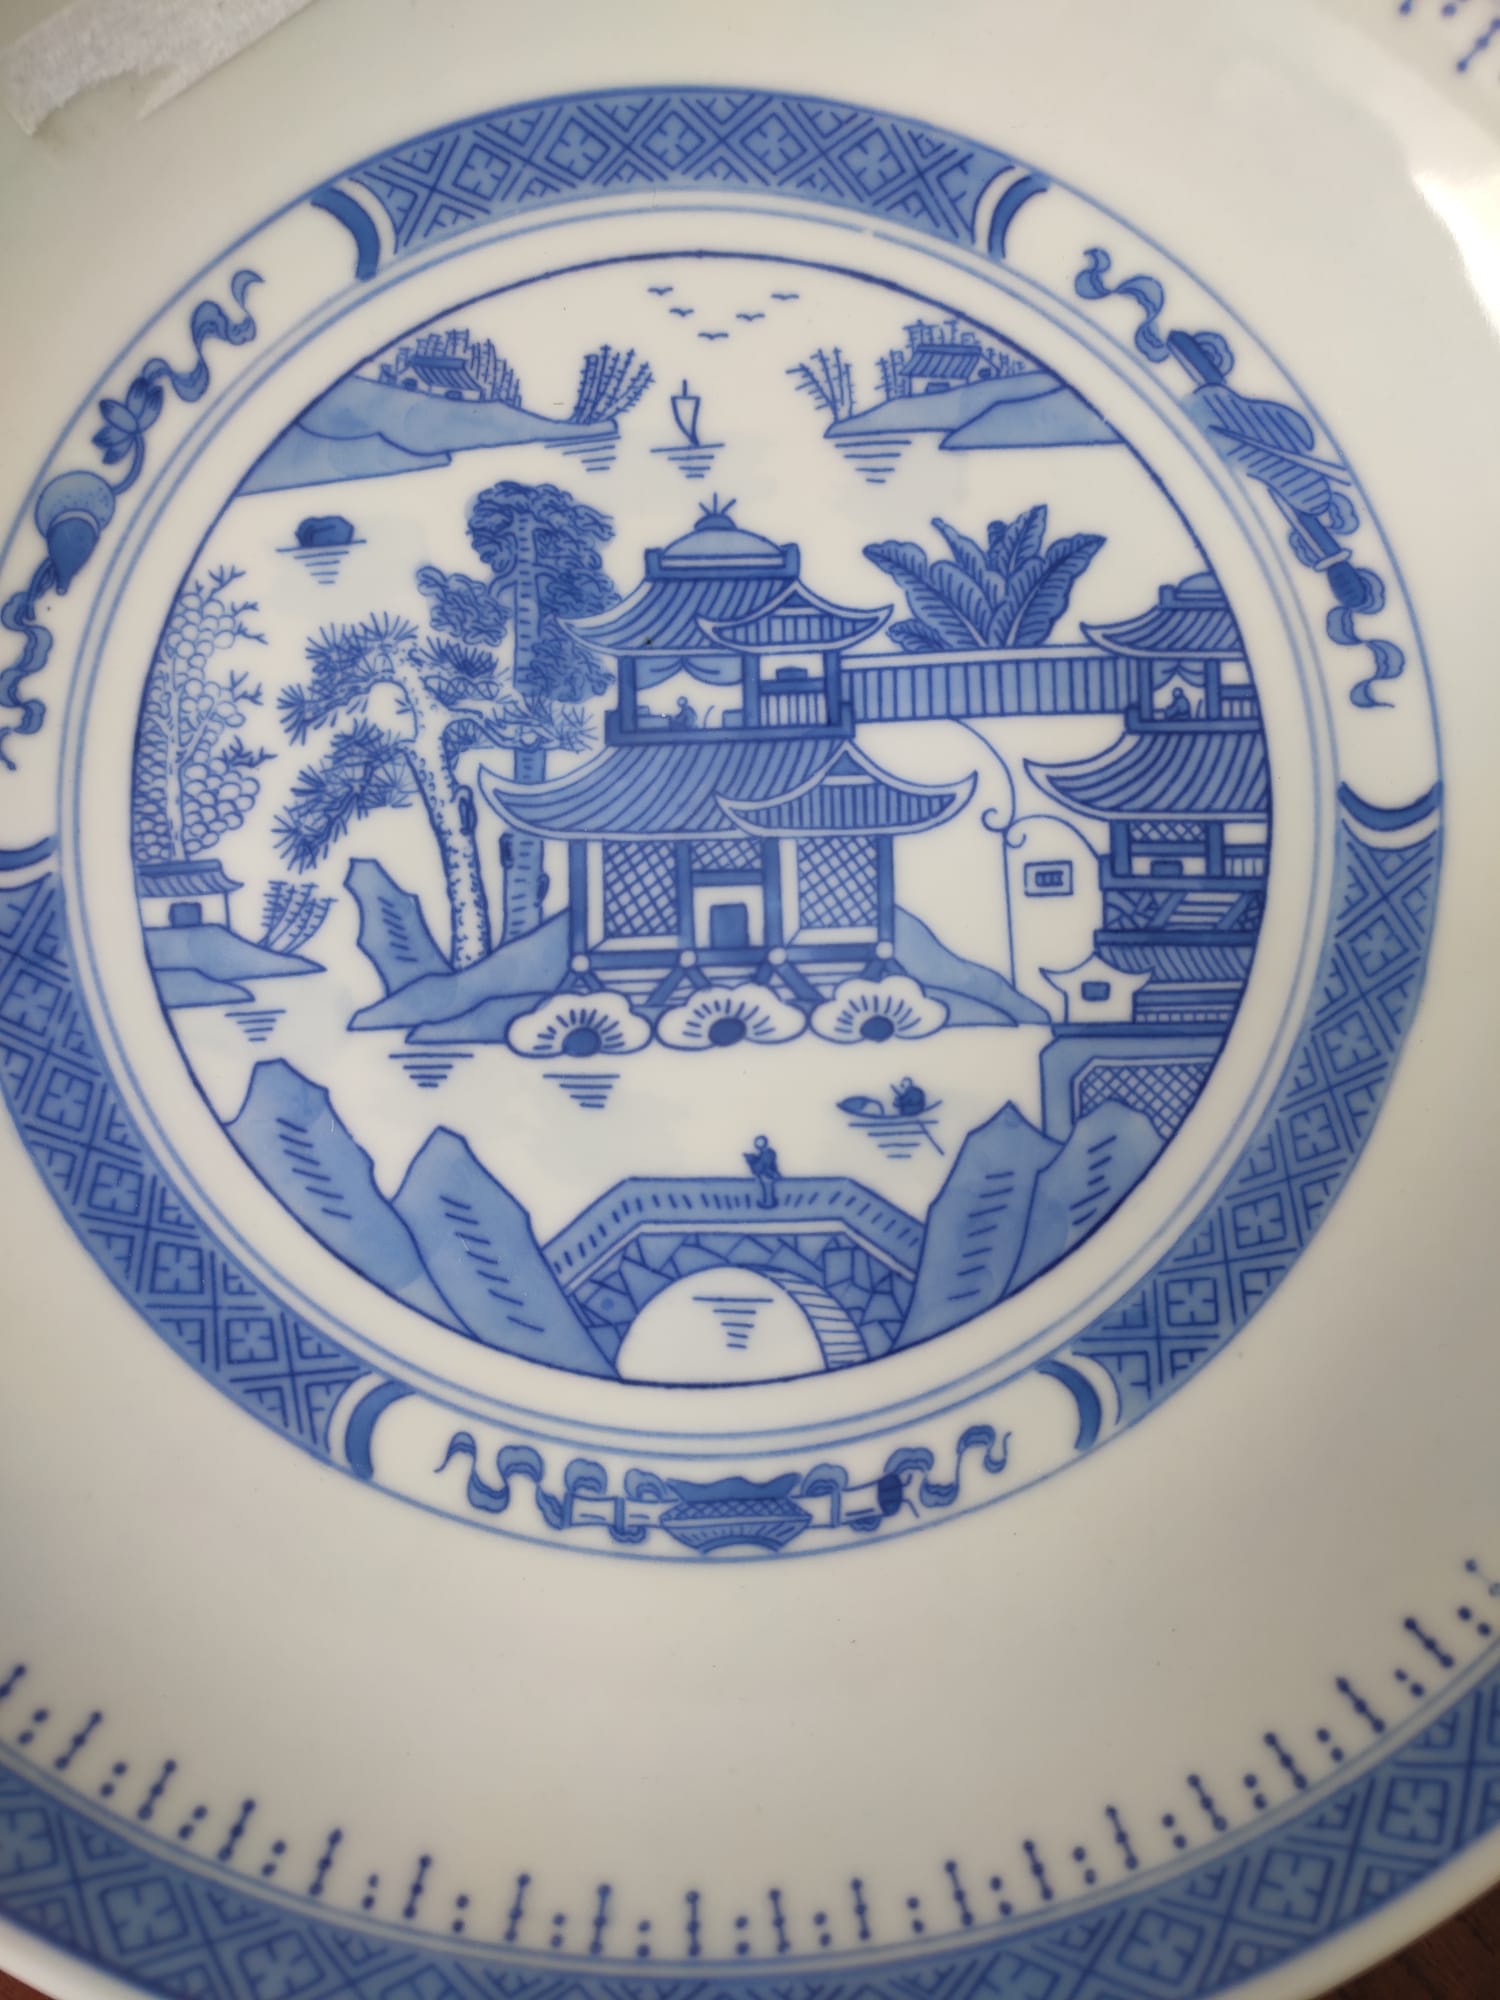 Big Blue and white plate with big foot